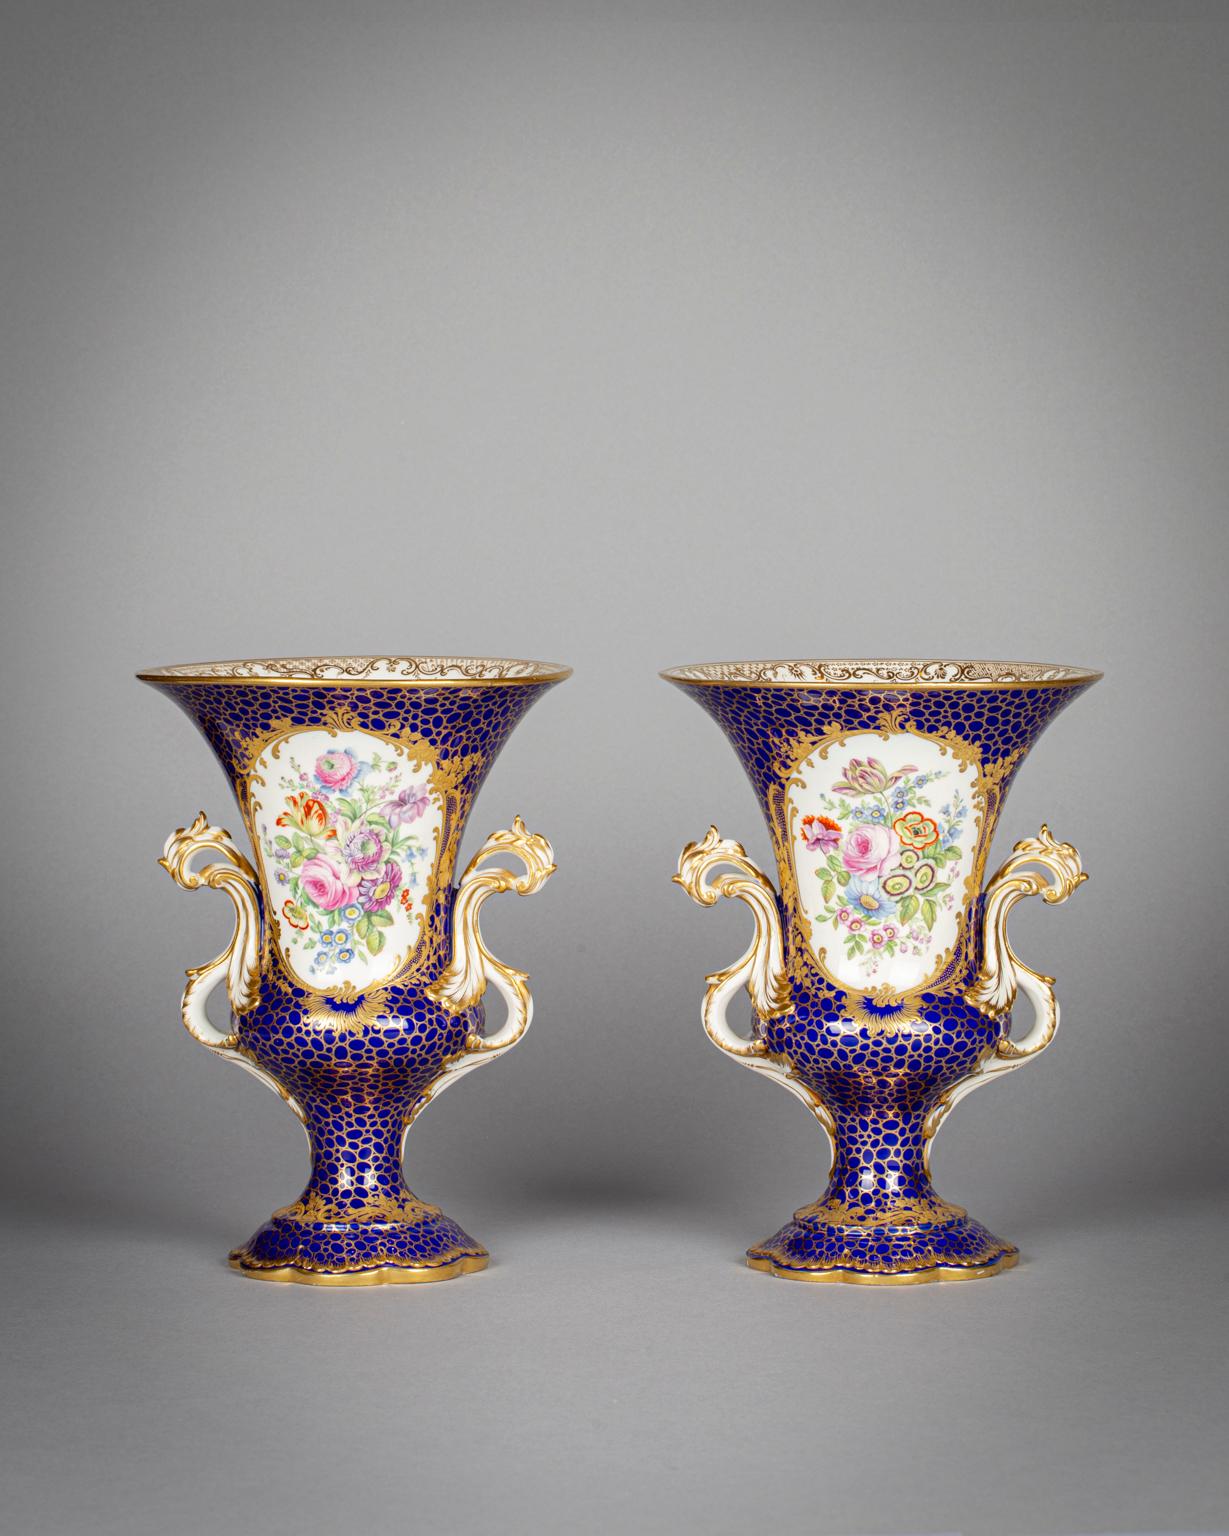 Each vase depicts a landscape scene on one side and a bouquet of flowers on the other.